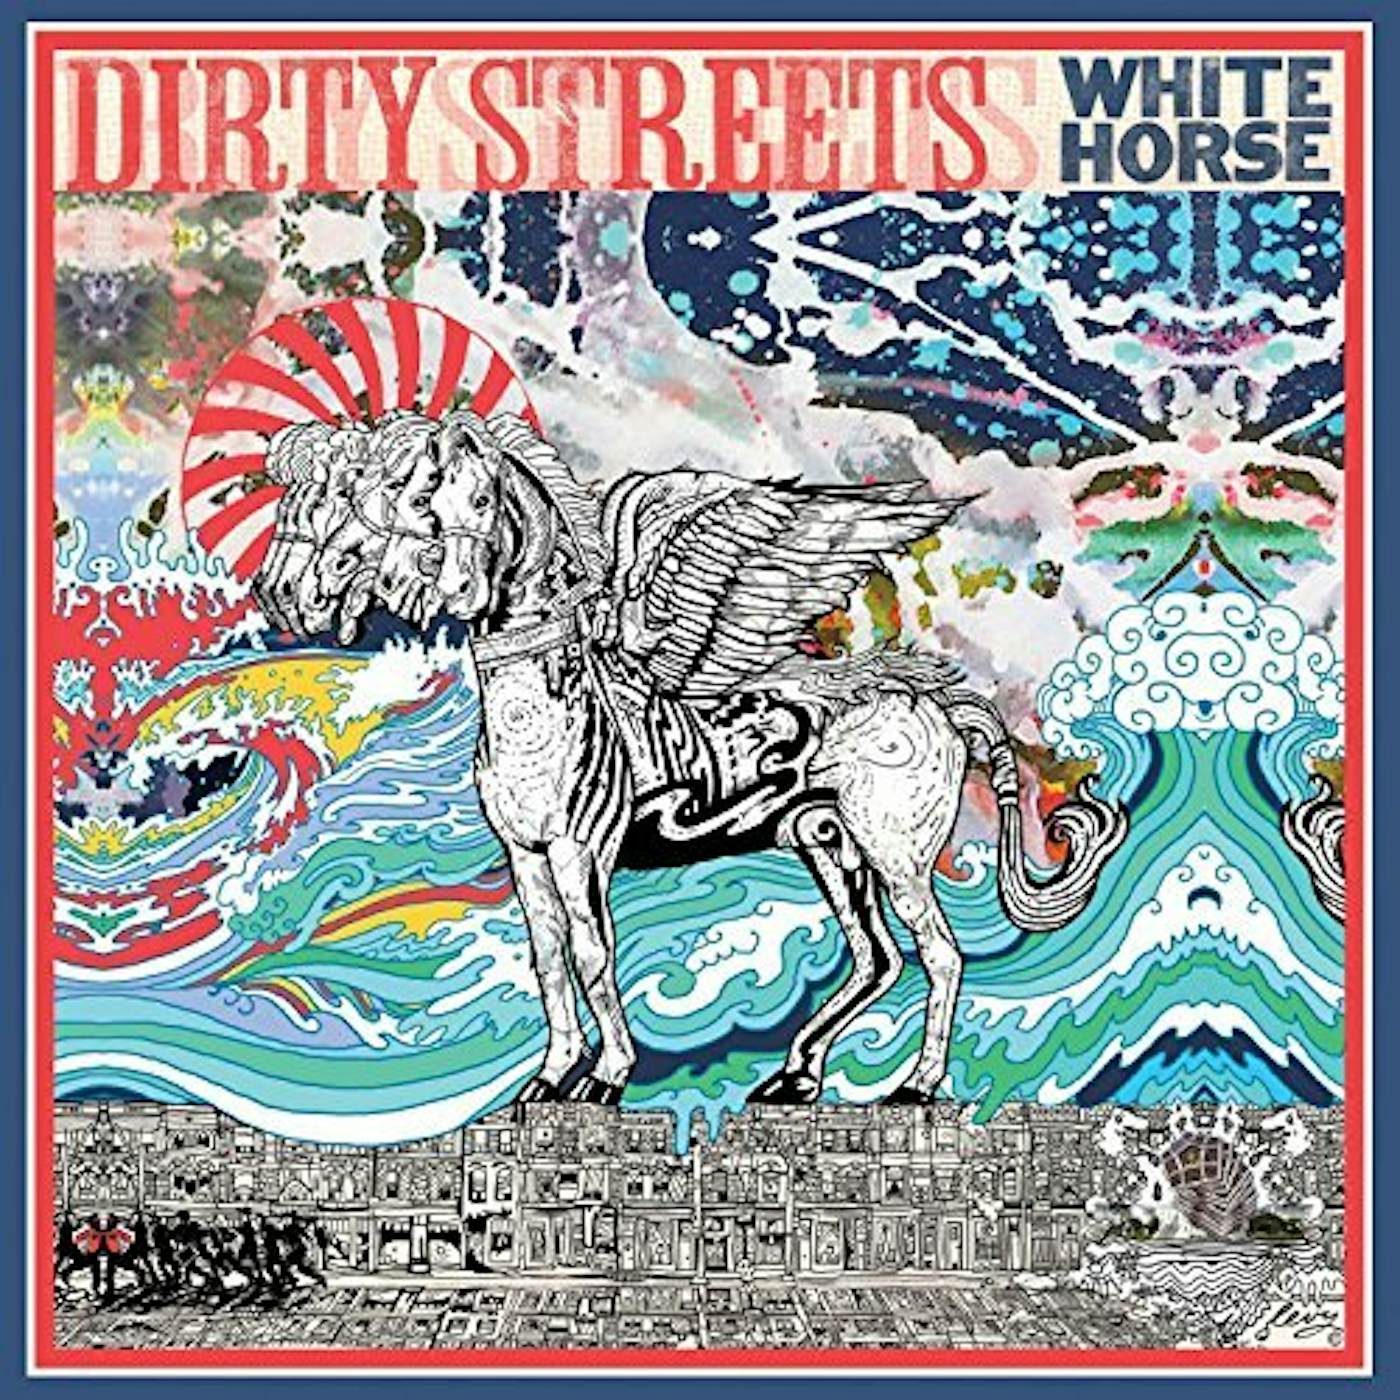 Dirty Streets WHITE HORSE CD